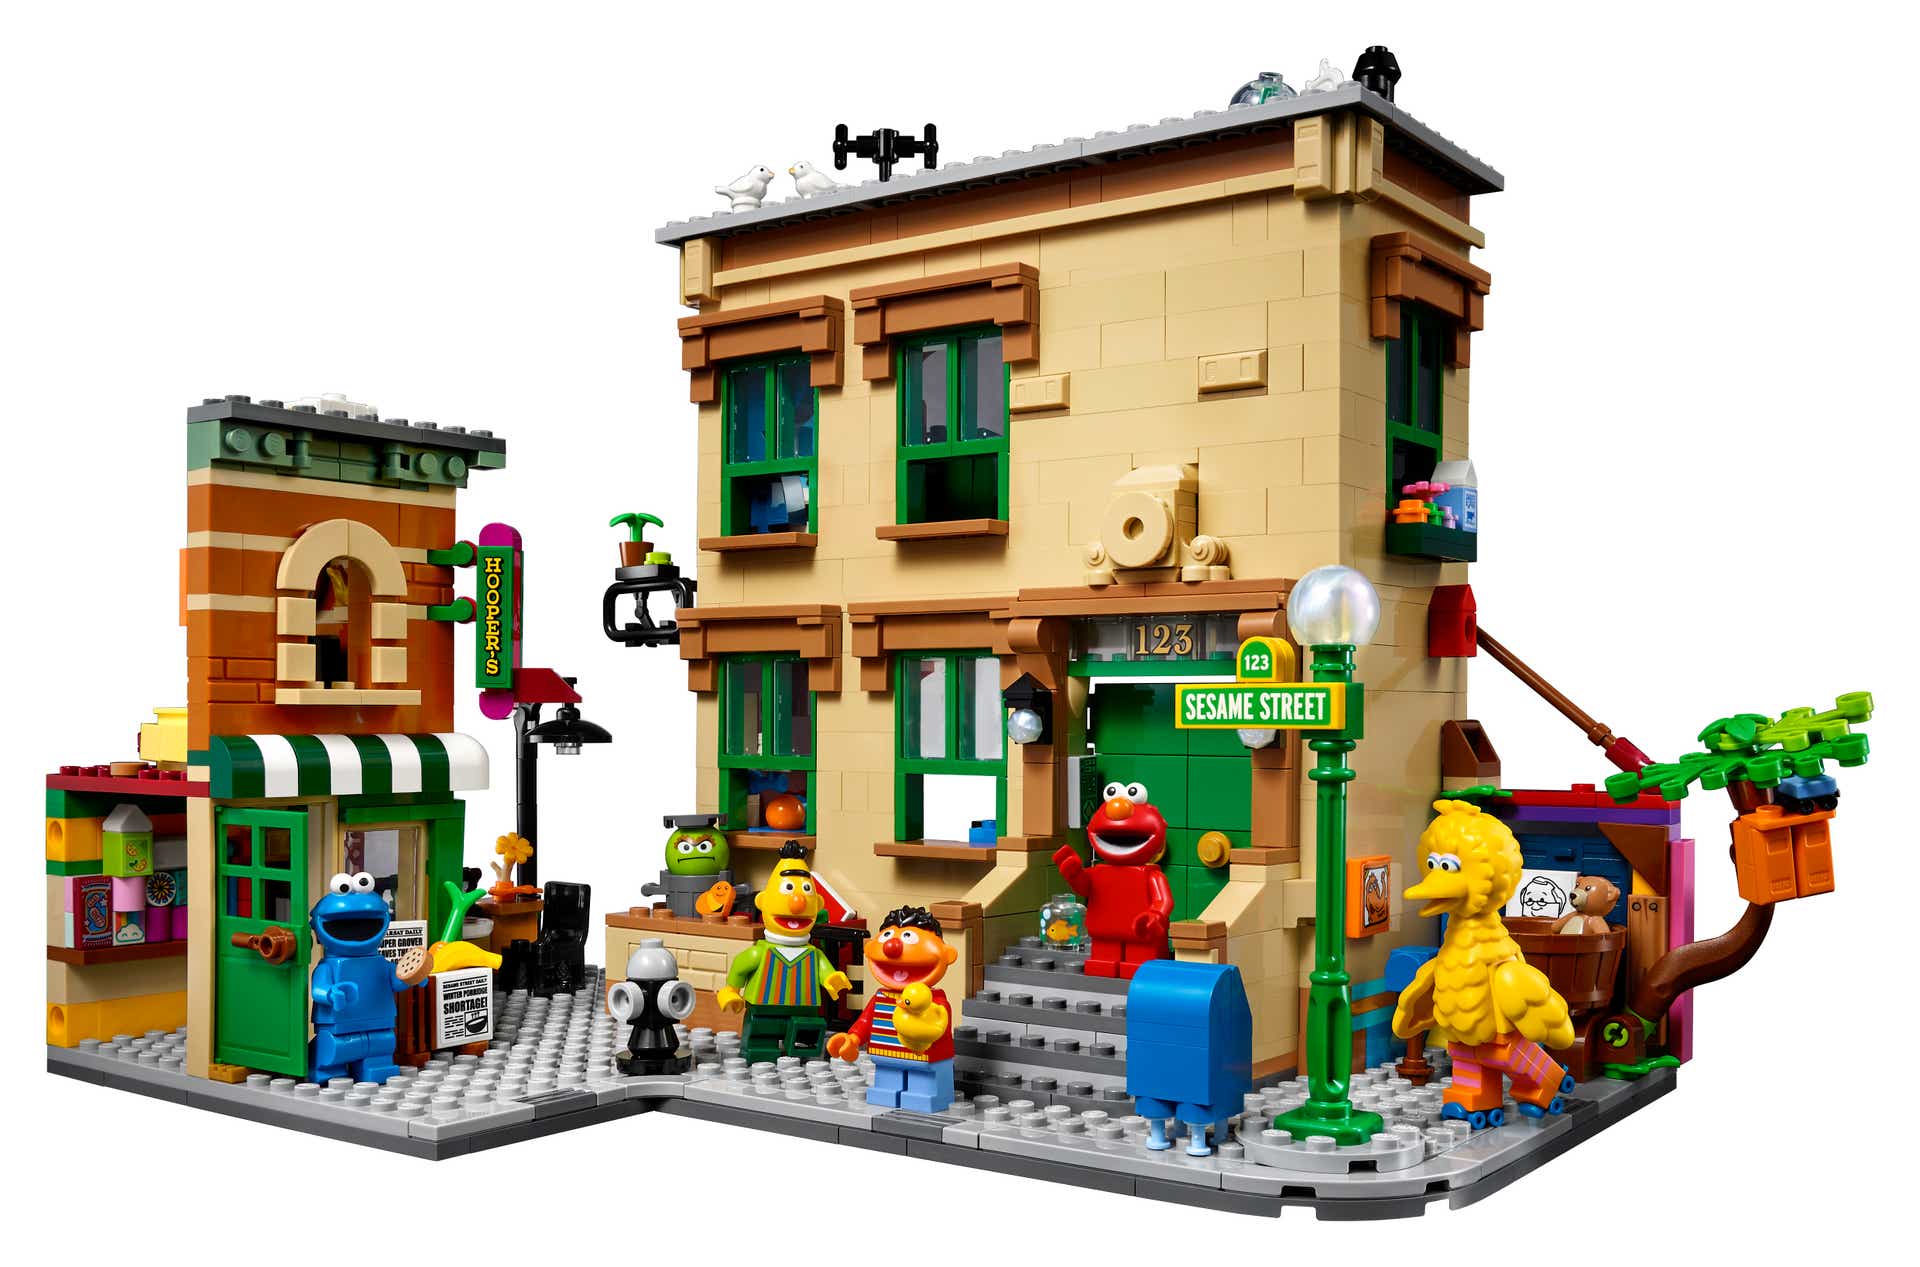 Step Up To The BrandNew LEGO® Ideas 123 Sesame Street About us